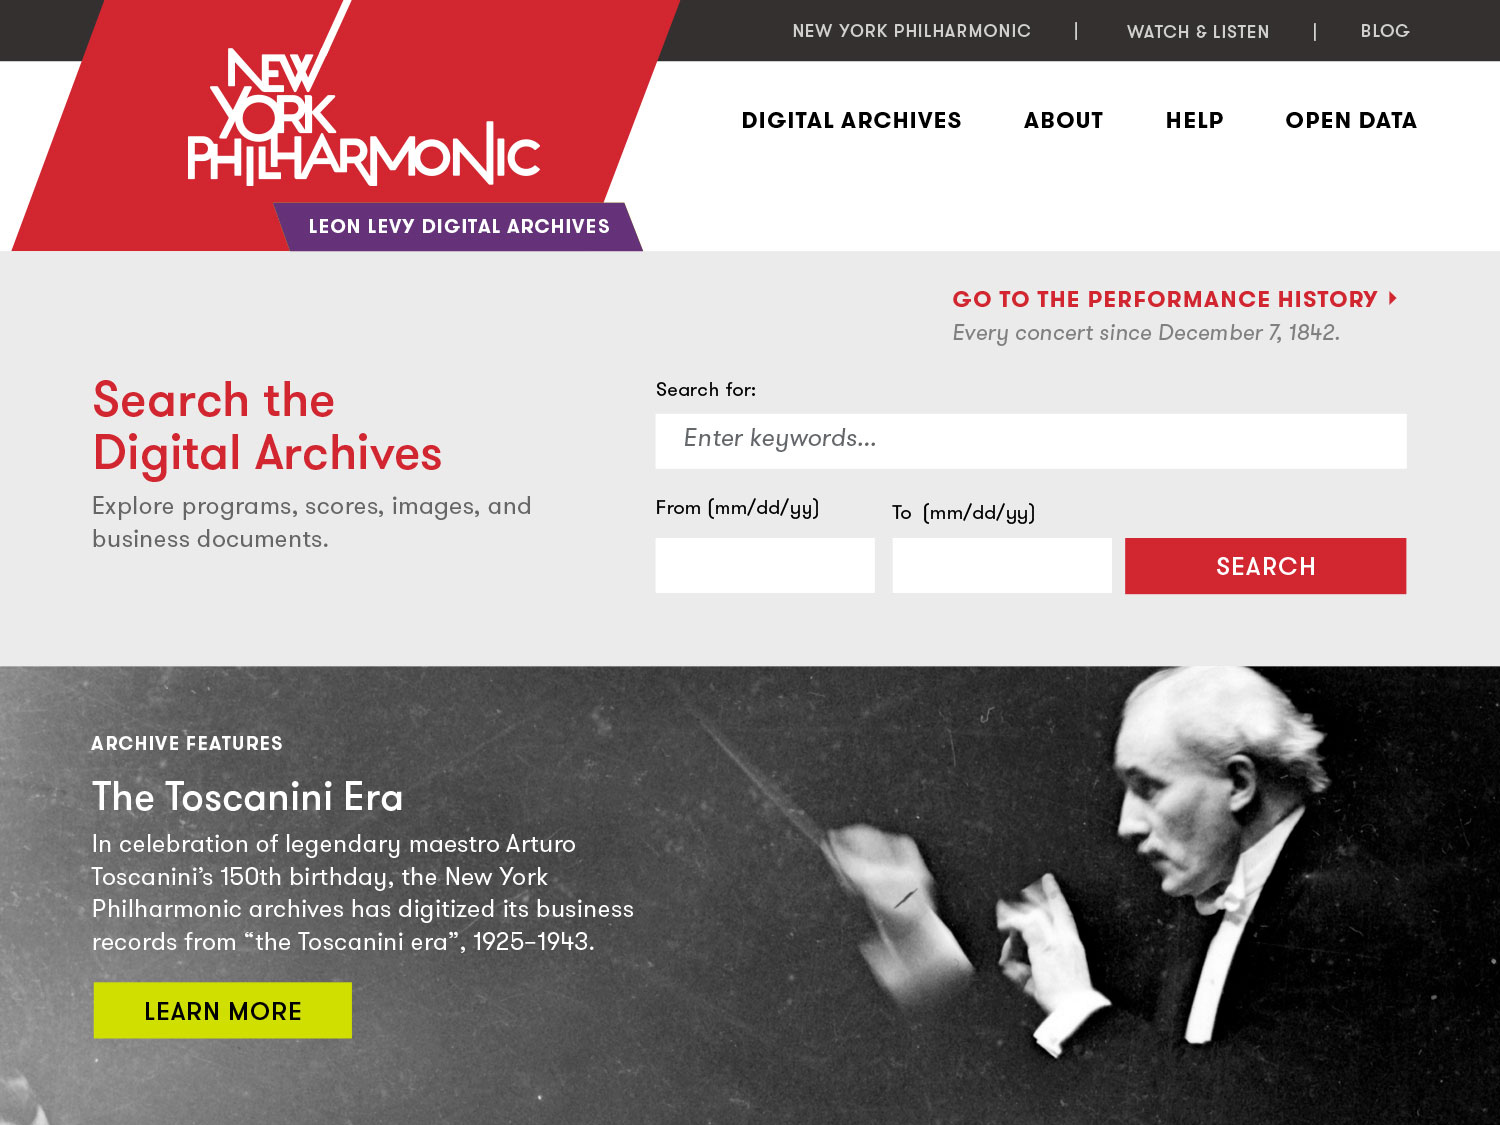 NYPhil Archives website home page